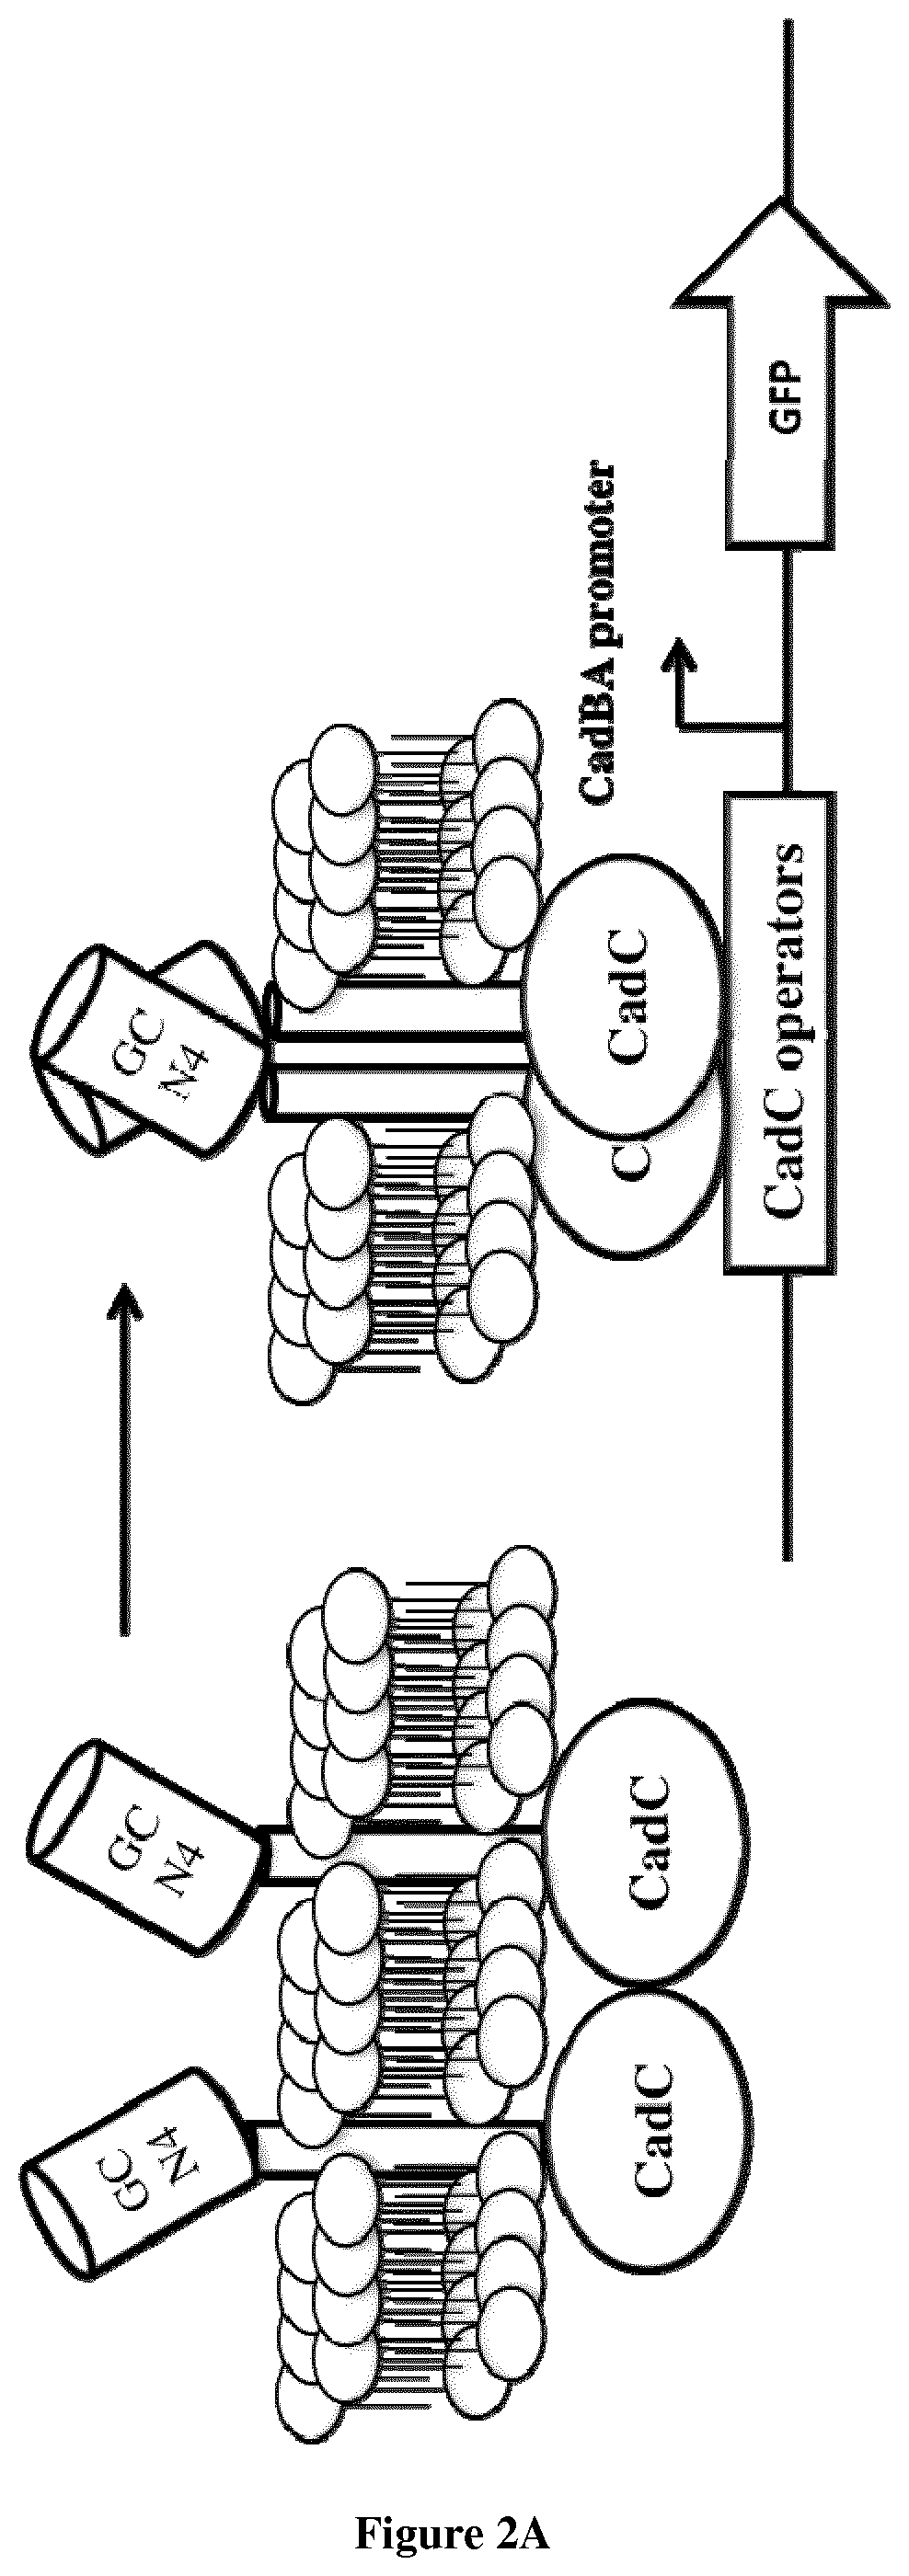 Chimeric receptor for use in whole-cell sensors for detecting analytes of interest